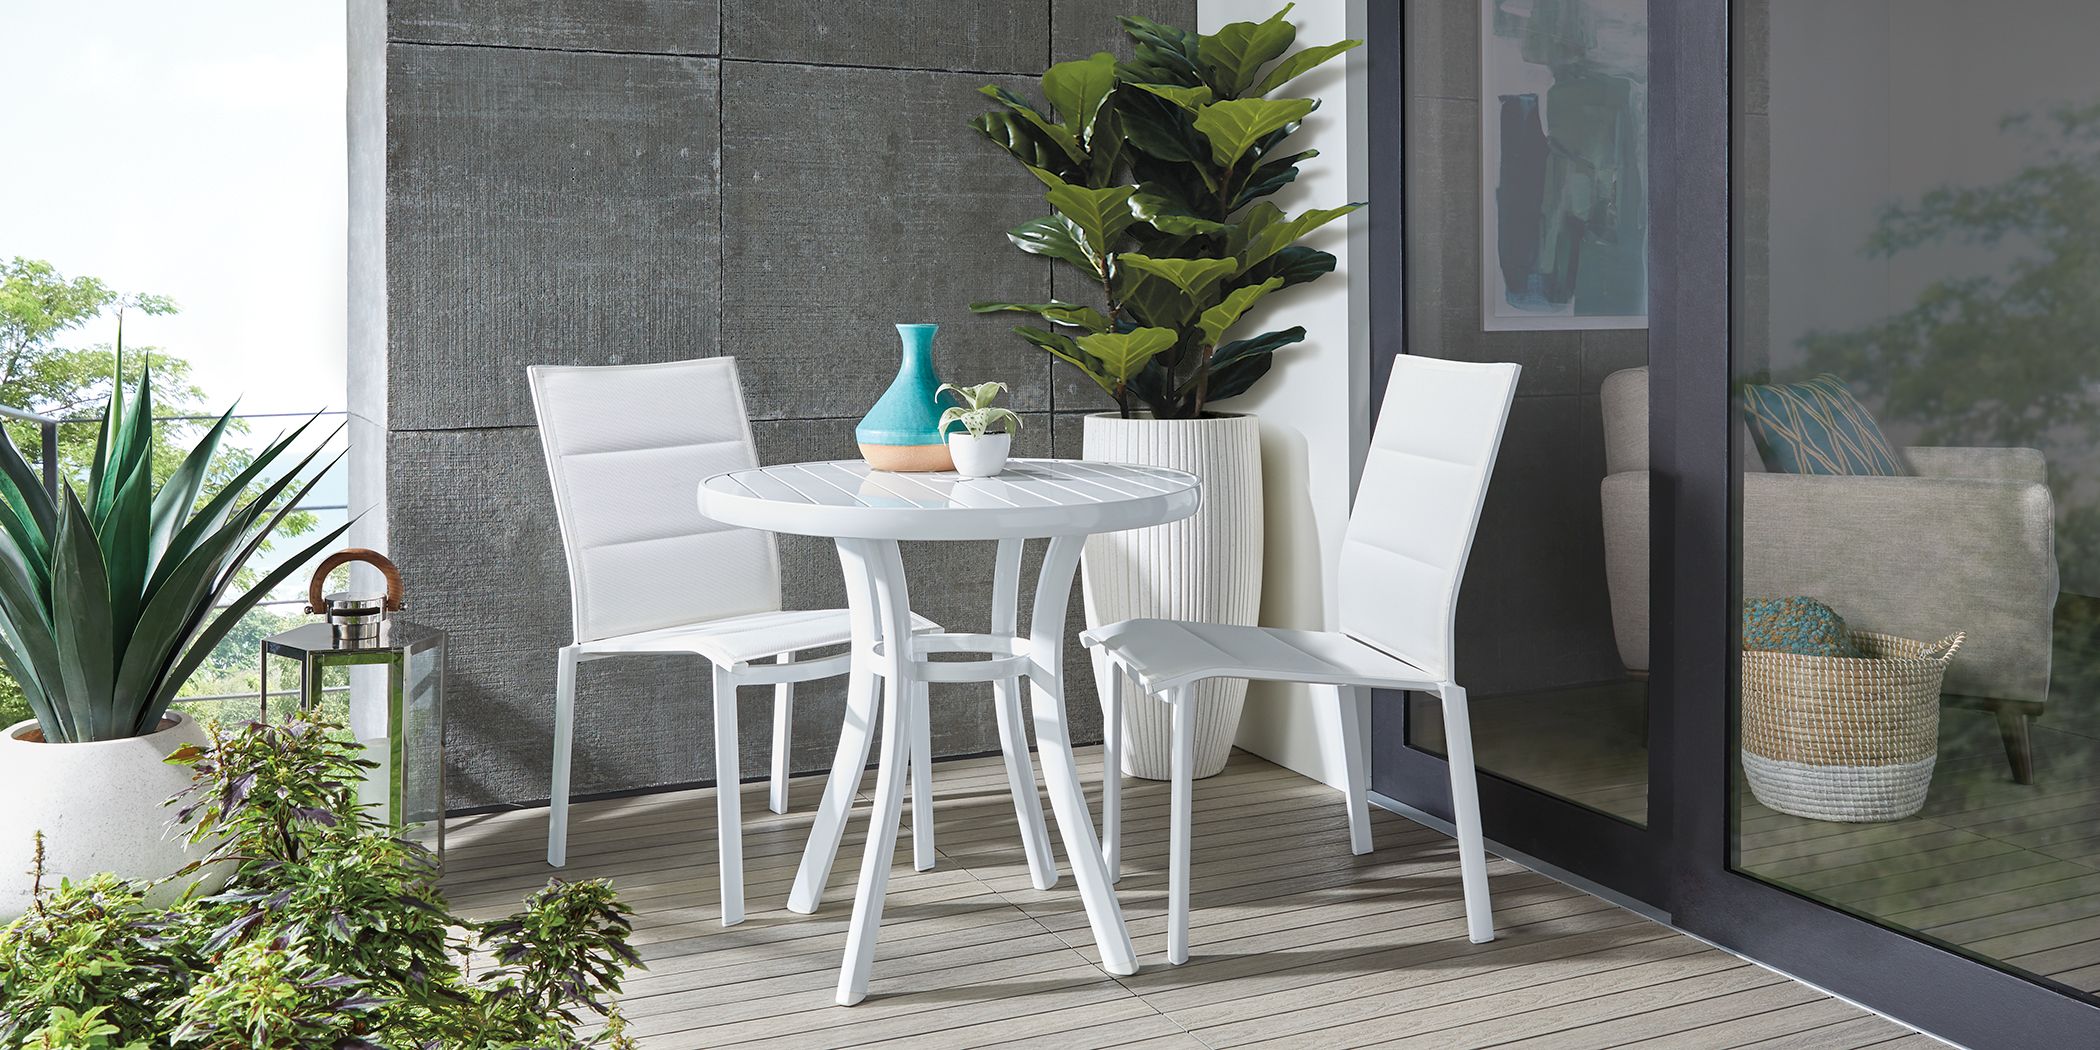 Solana White 3 Pc Outdoor Dining Set Rooms To Go